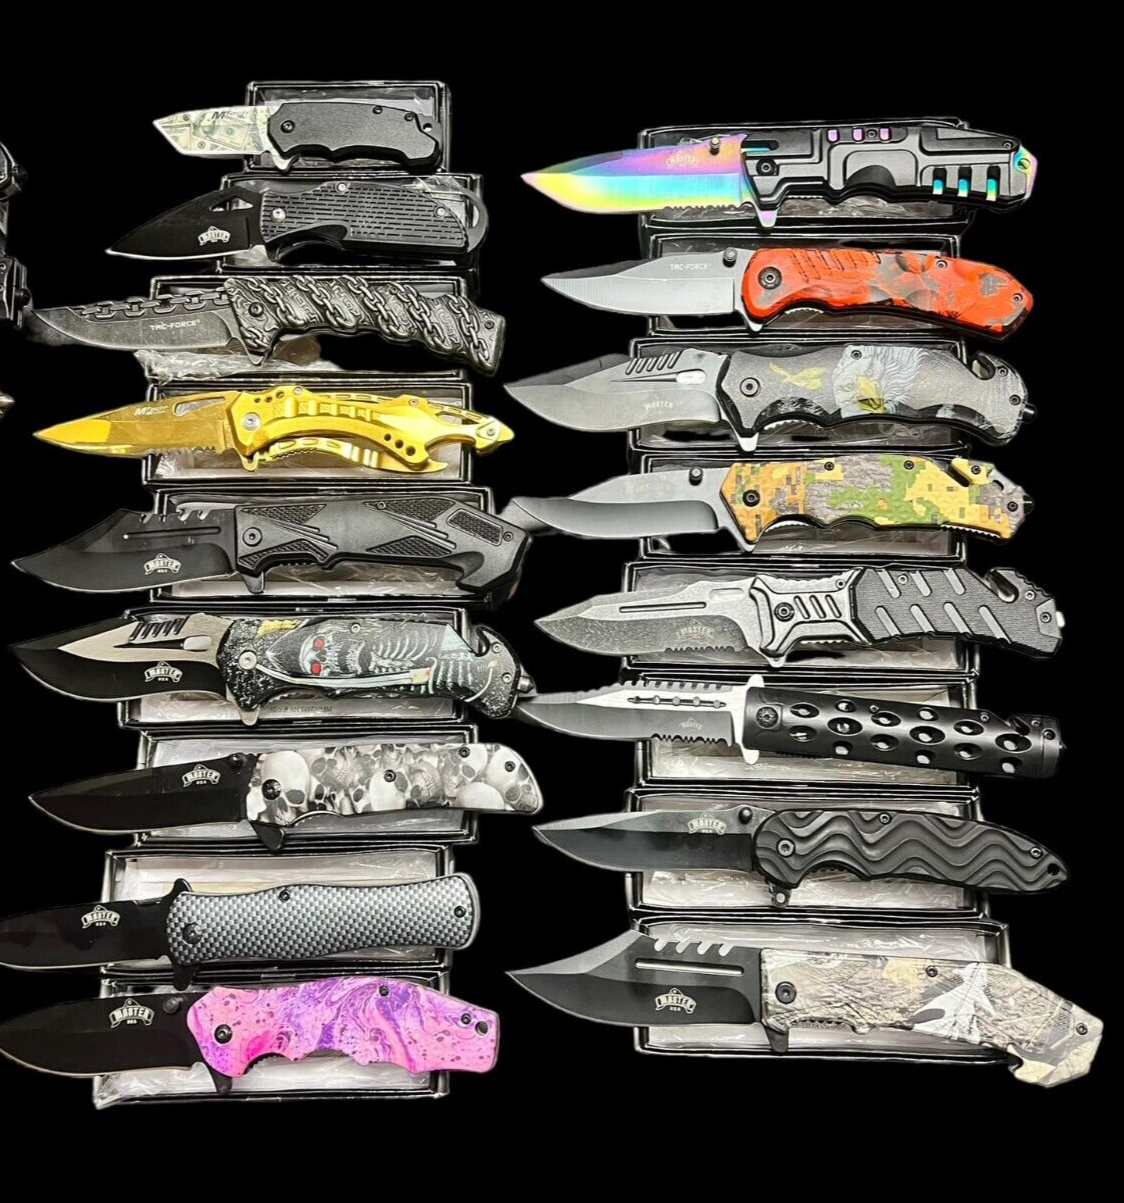 LOT OF 45 Spring Assisted pocket knife Collectible Design Wholesale Knives AS-IS Без бренда - фотография #9